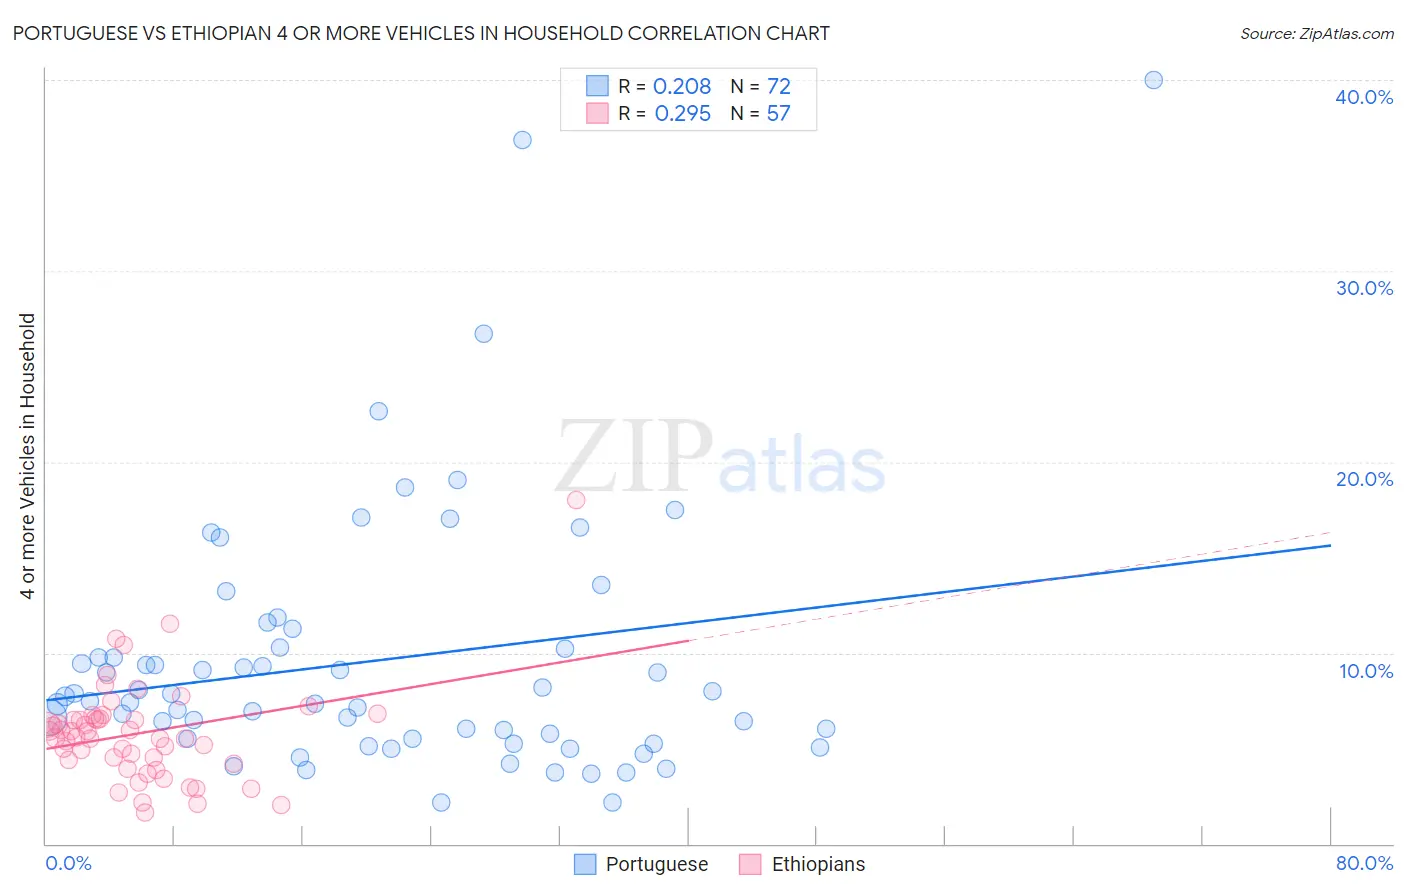 Portuguese vs Ethiopian 4 or more Vehicles in Household